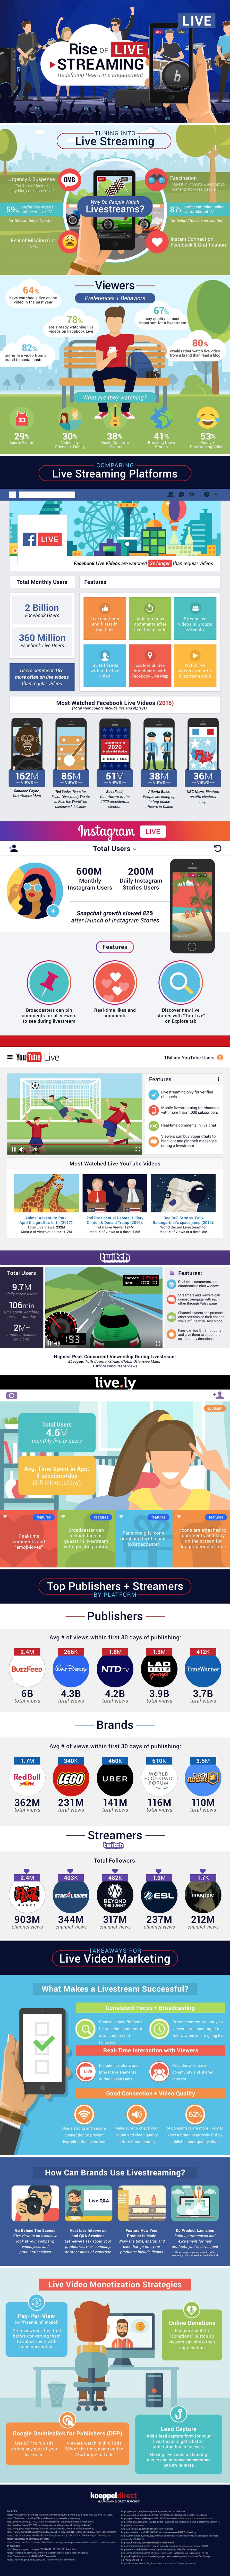 Live Streaming Trends & Marketing Tips Infographic